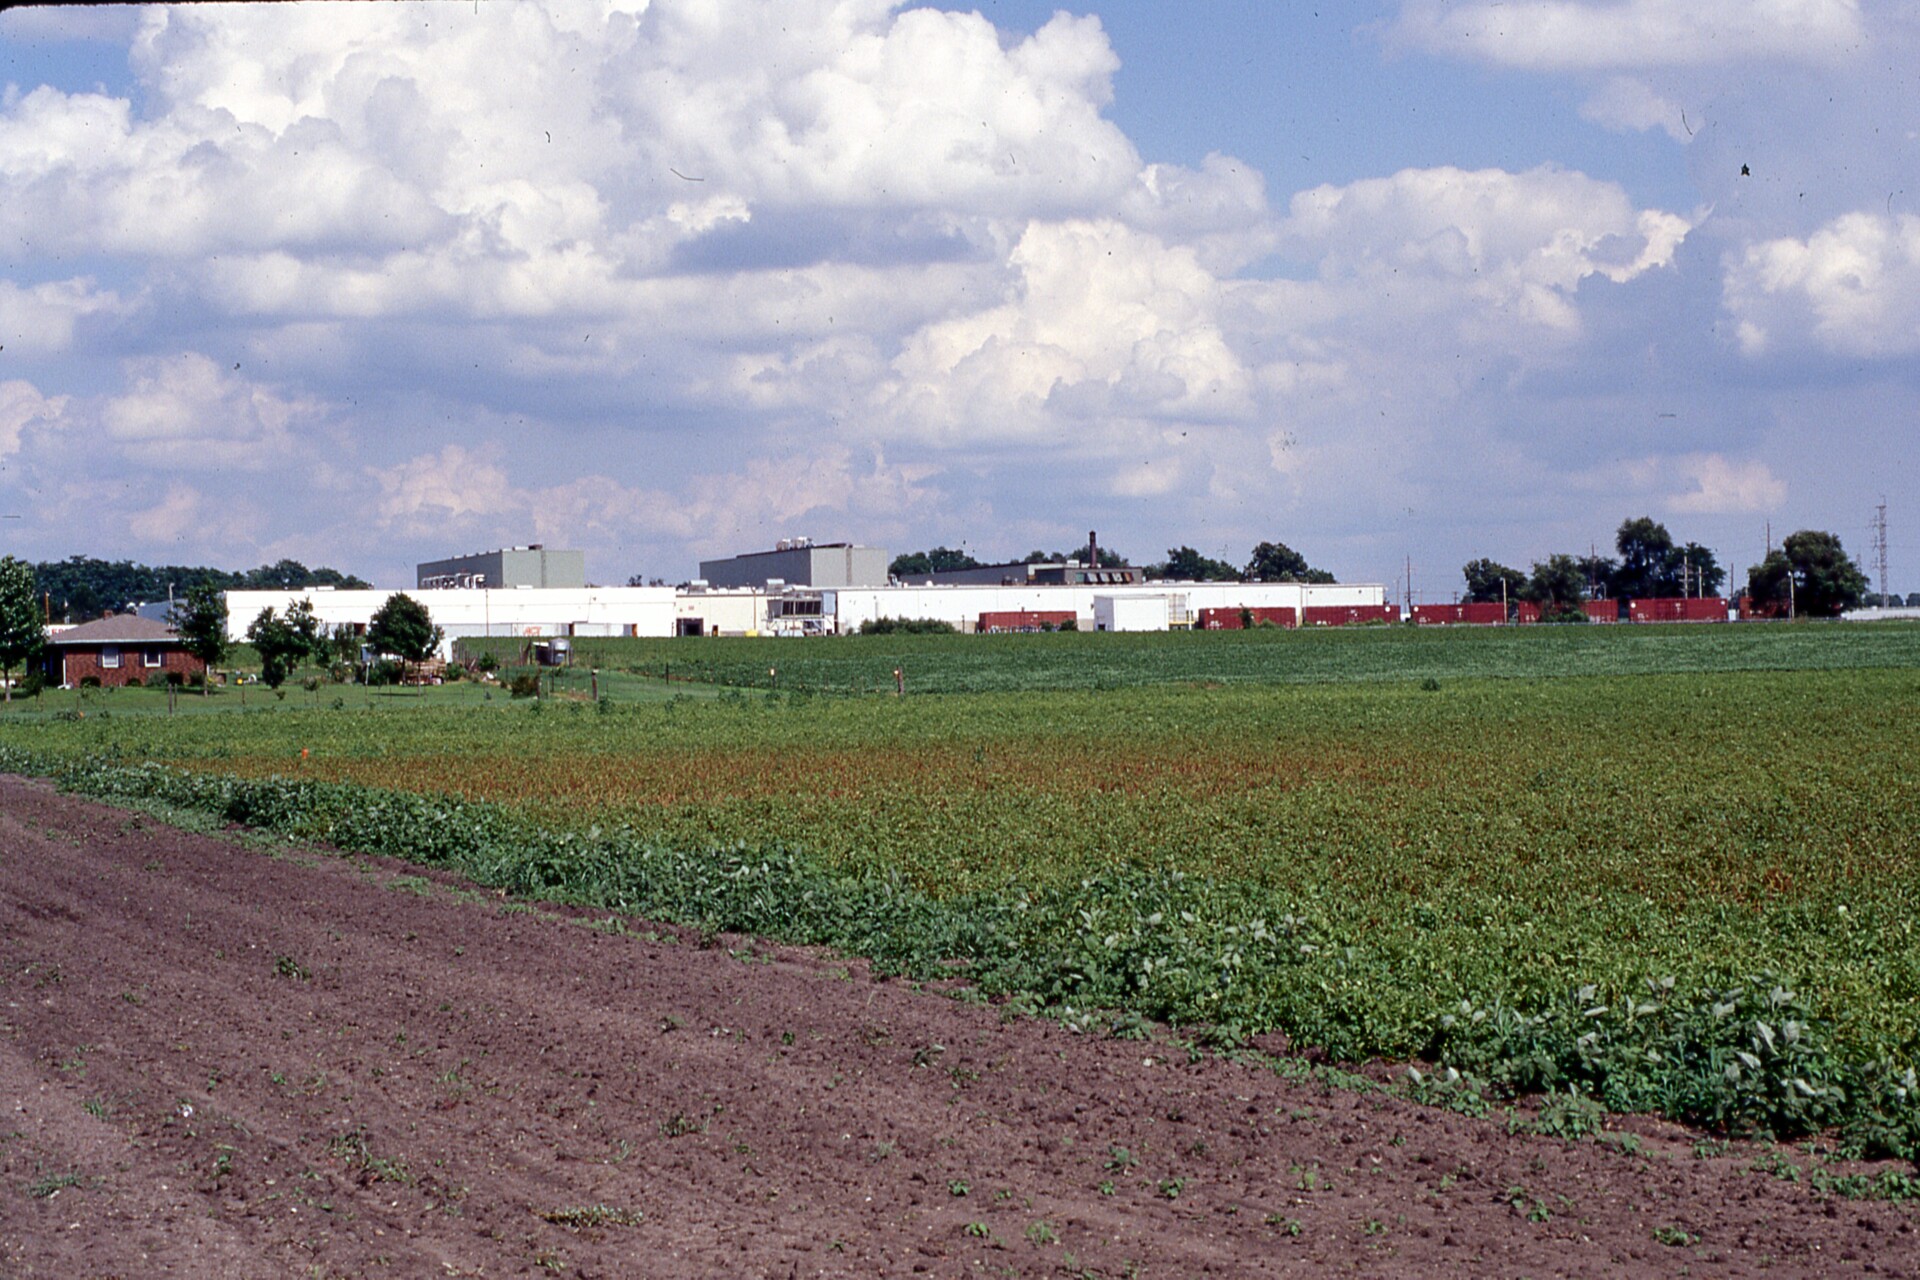 View of potato field with late blight.